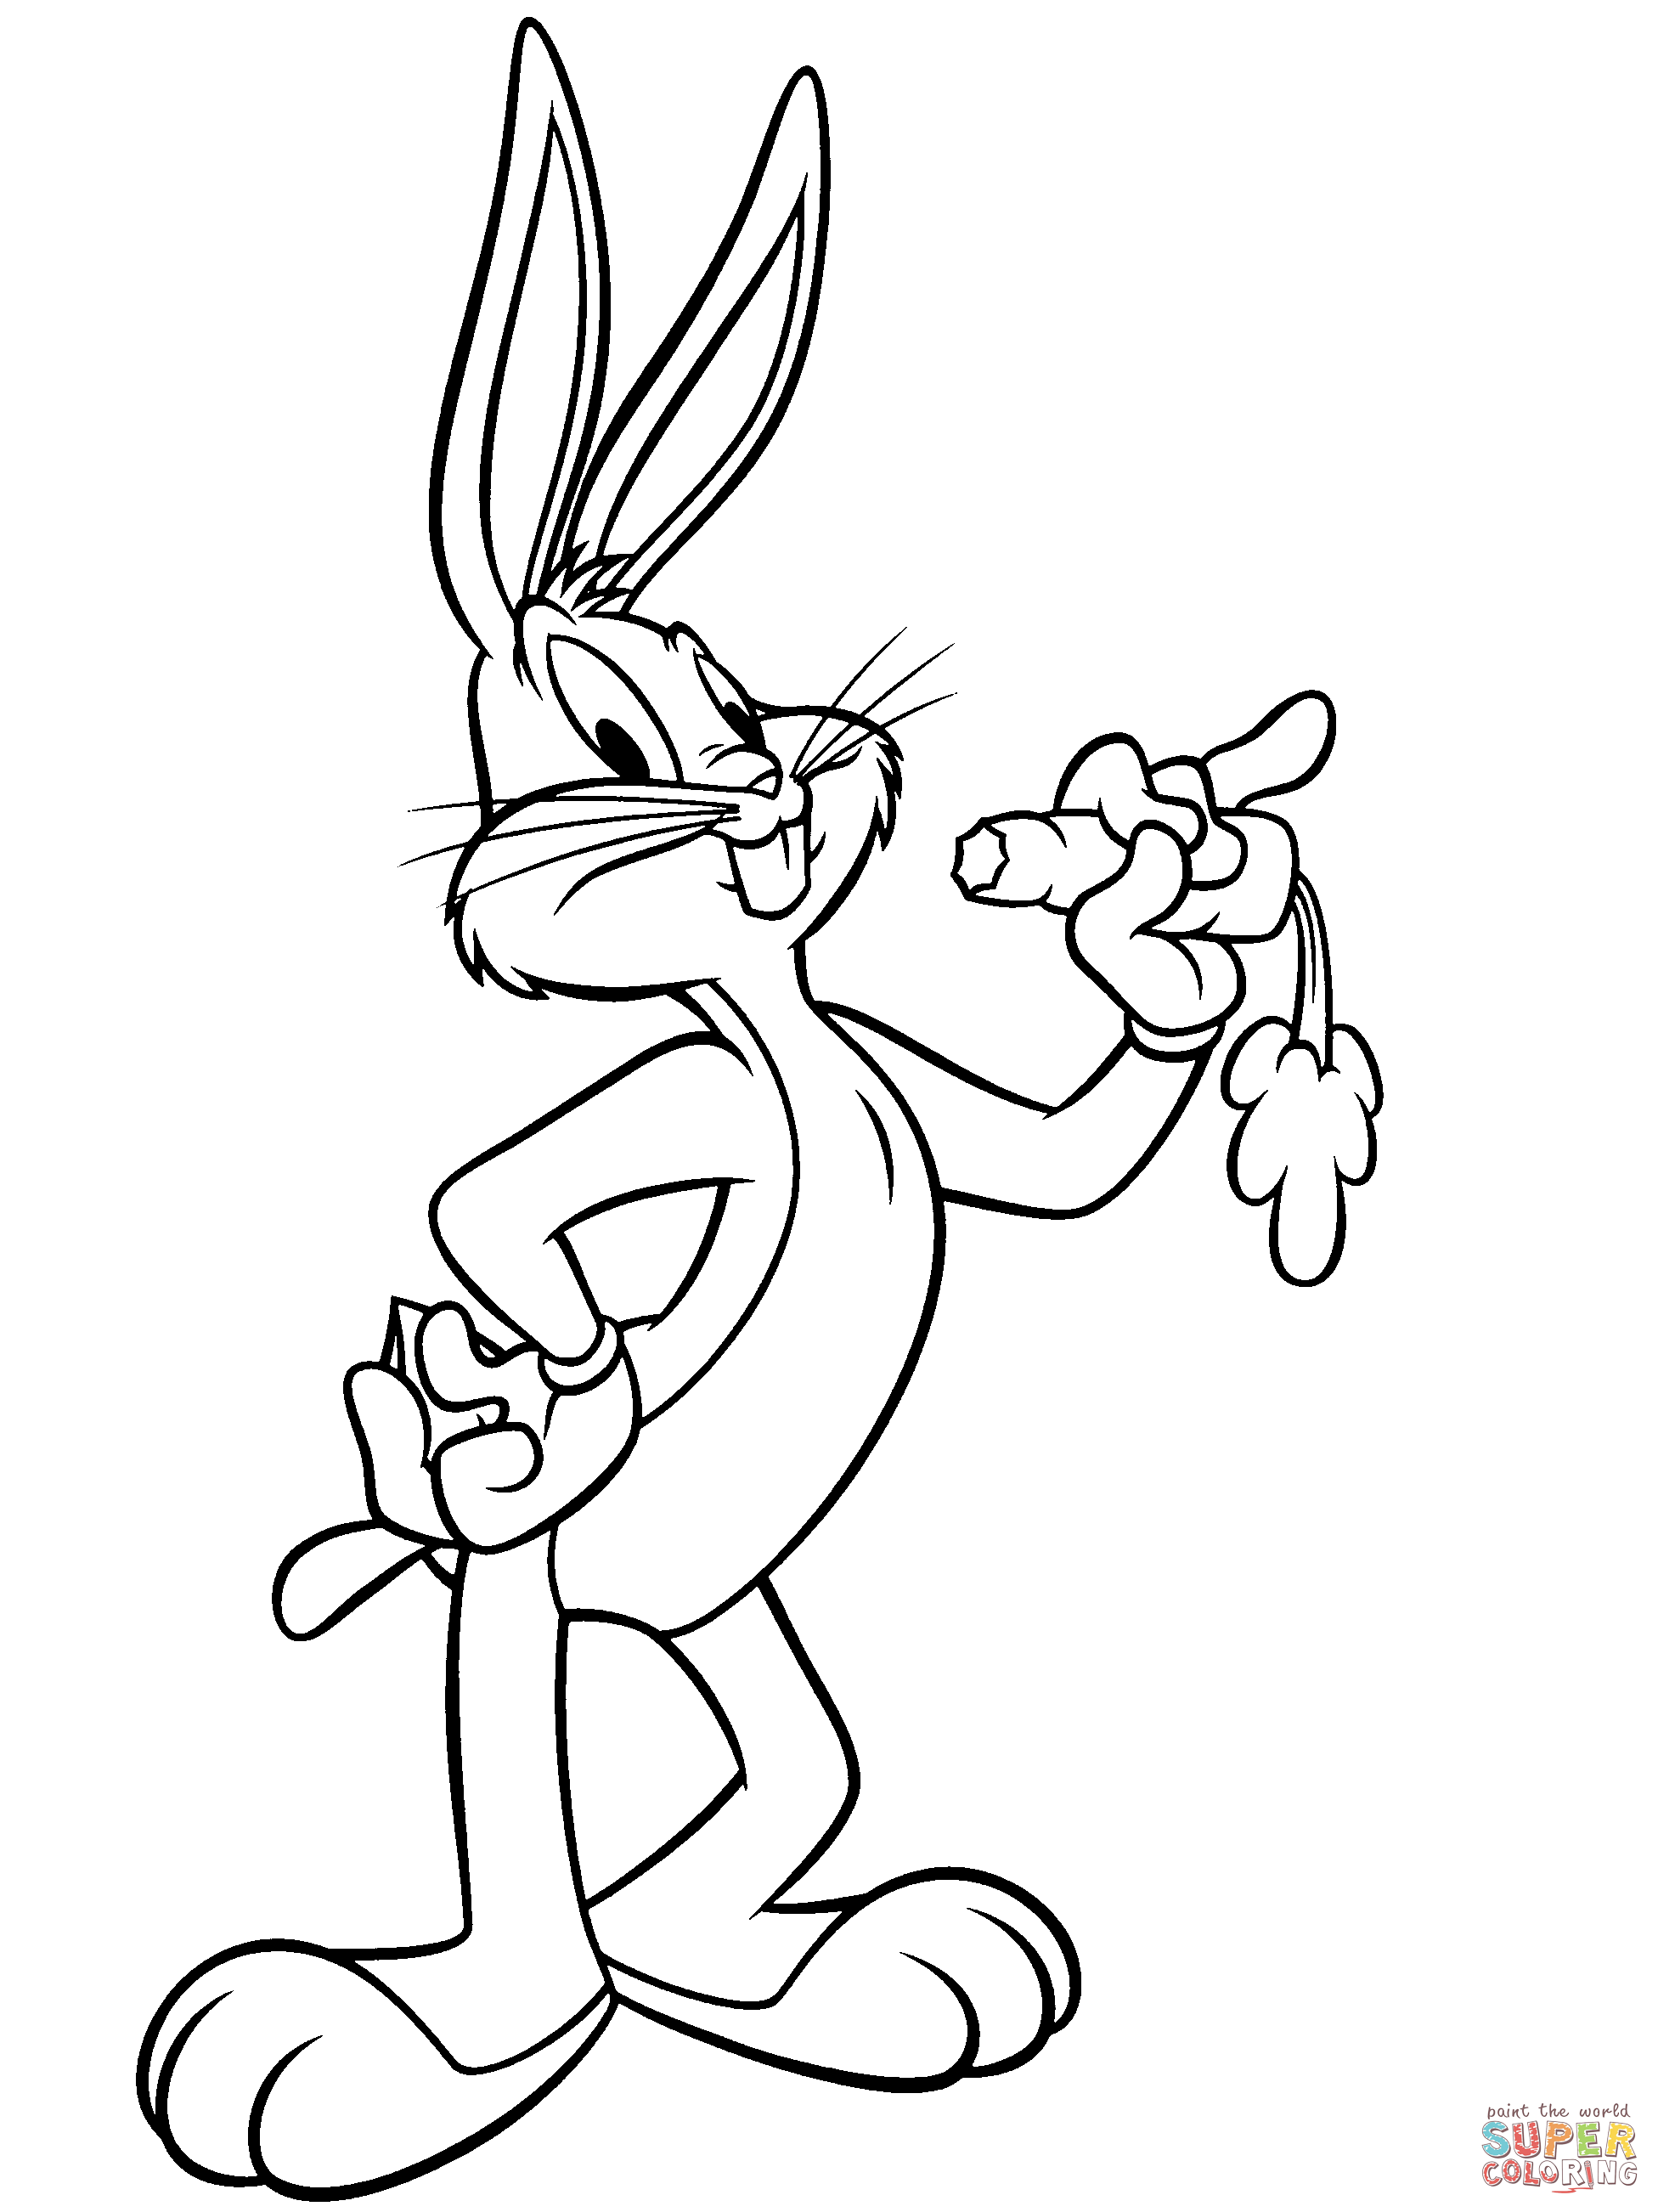 bugs-bunny-coloring-page-0056-q1